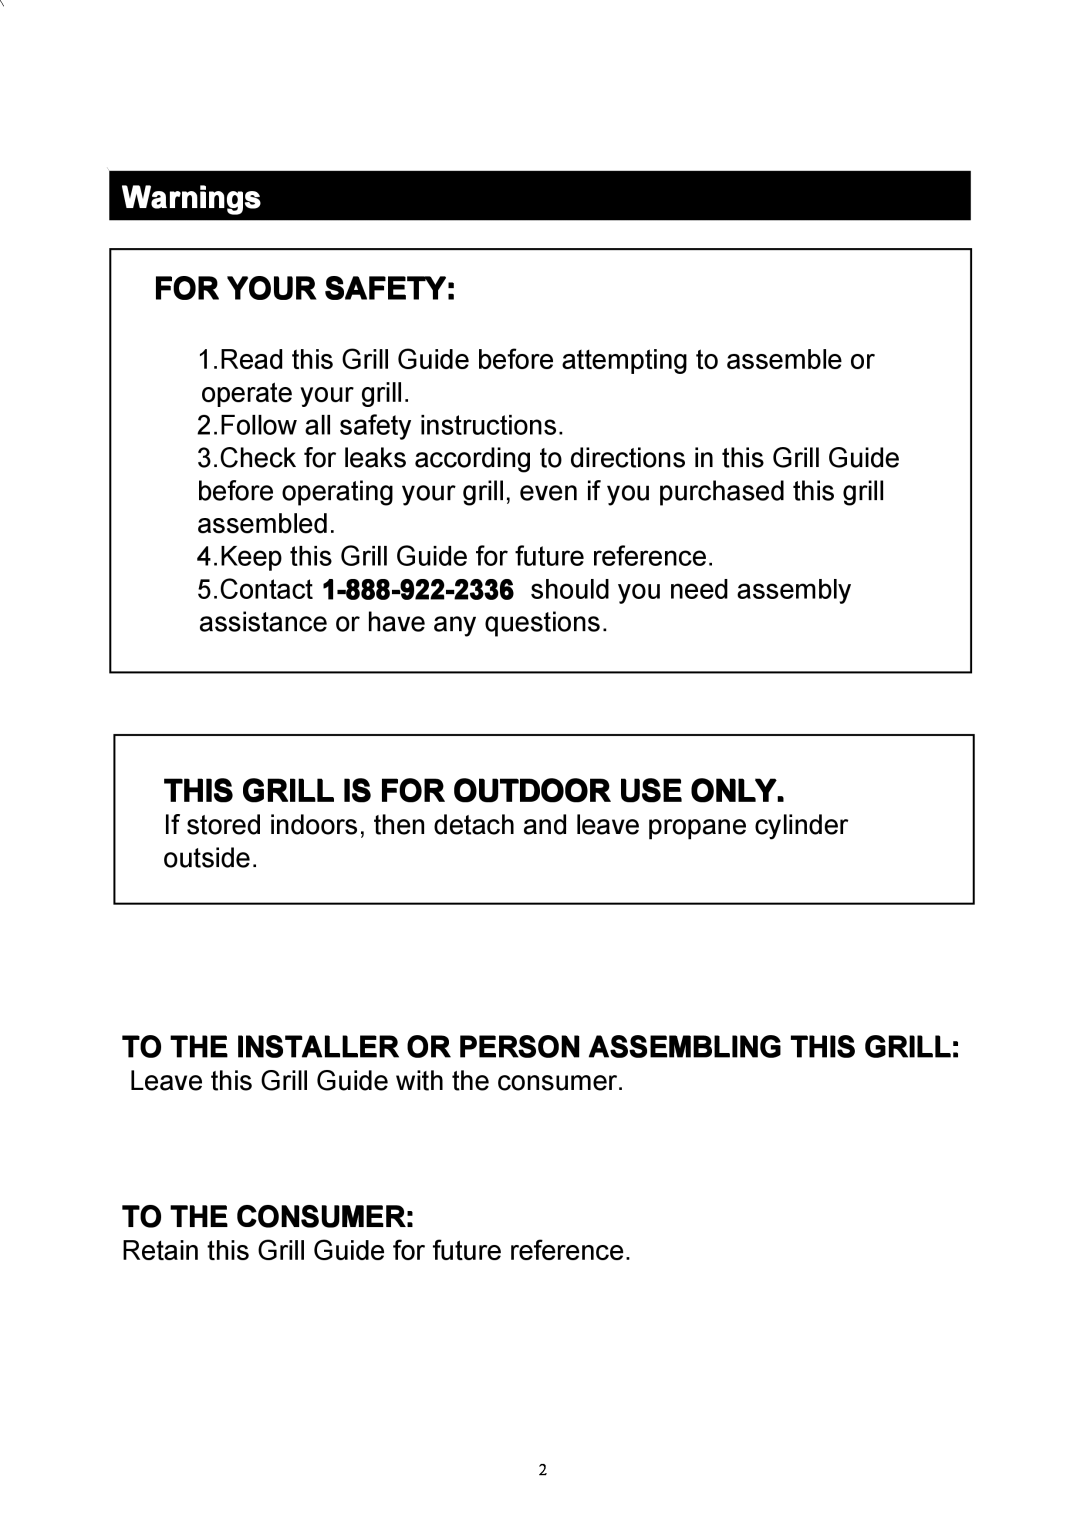 Outdoor Gourmet CG3023E instruction manual Warnings, For Your Safety, To The Consumer 